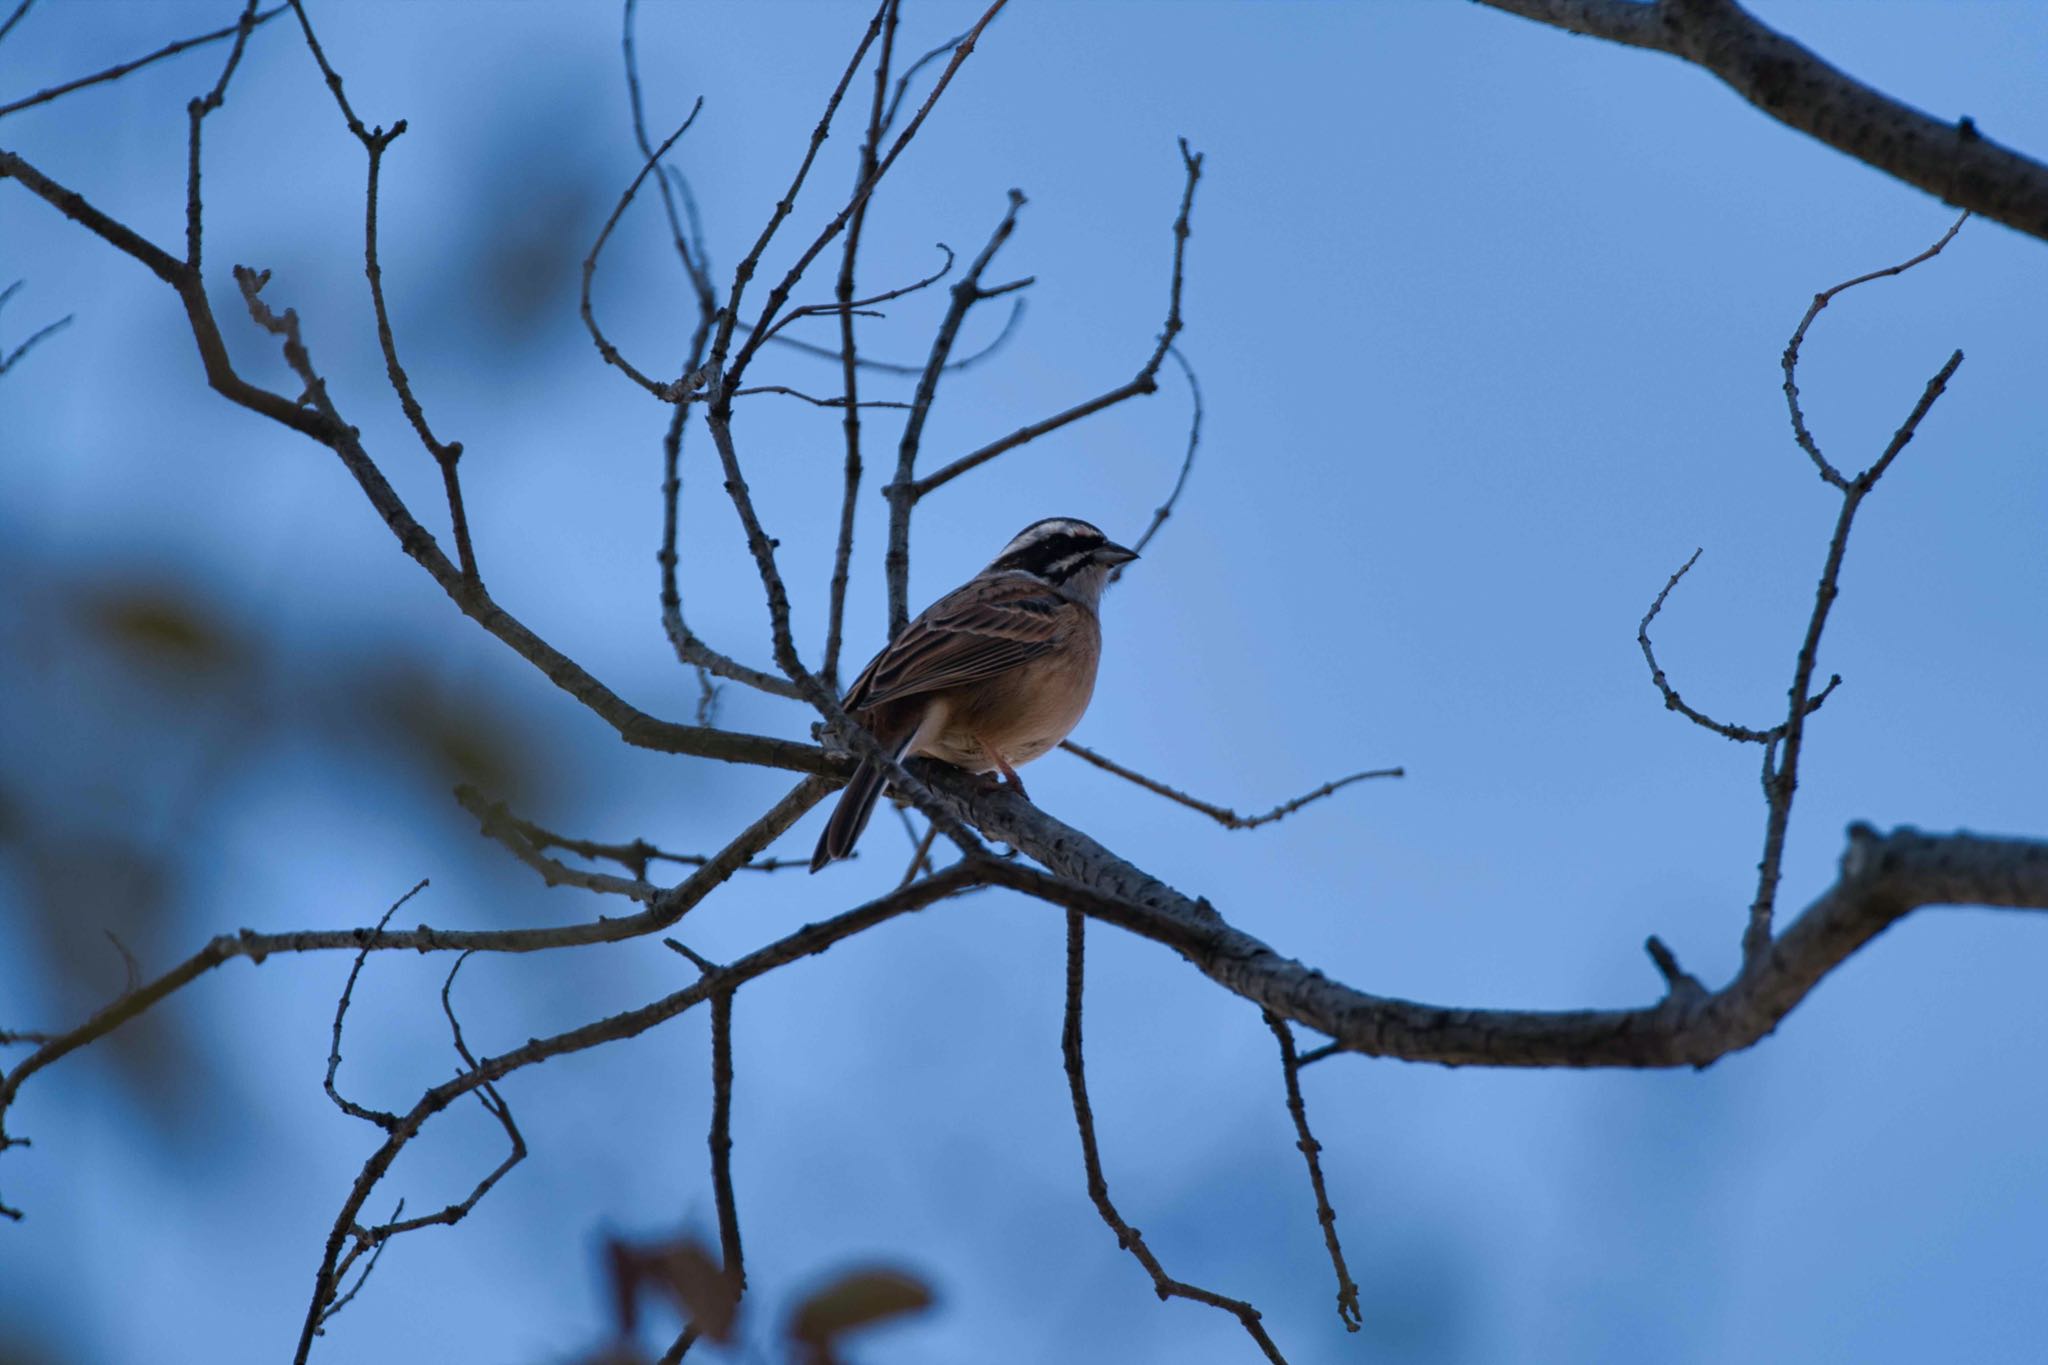 Photo of Meadow Bunting at さきたま古墳群 by あおじさん